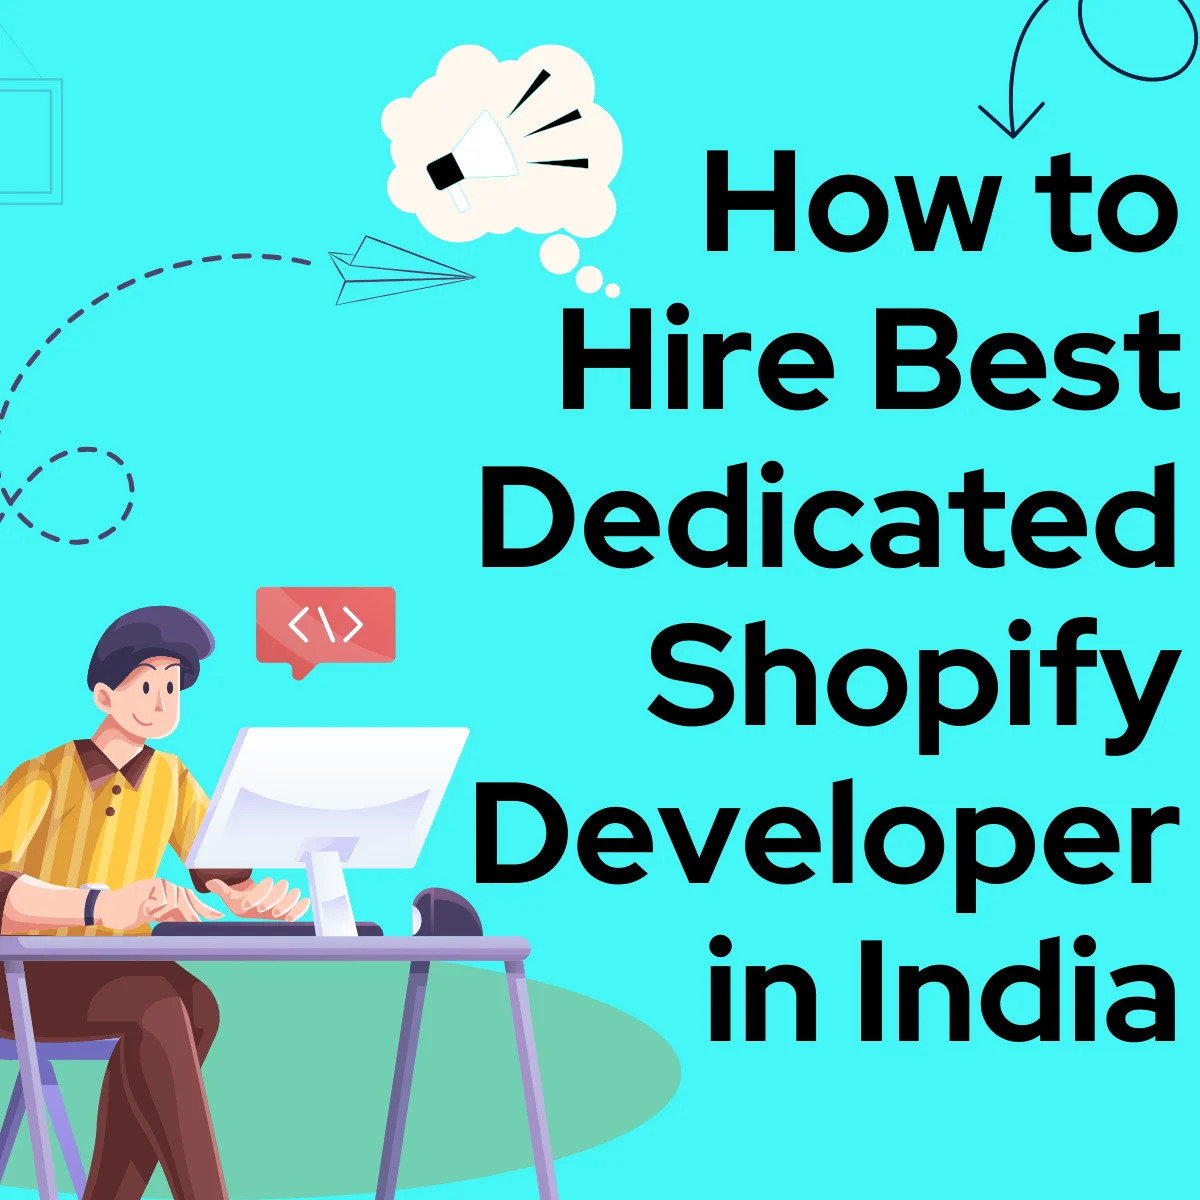 How to Hire Best Dedicated Shopify Developer in India